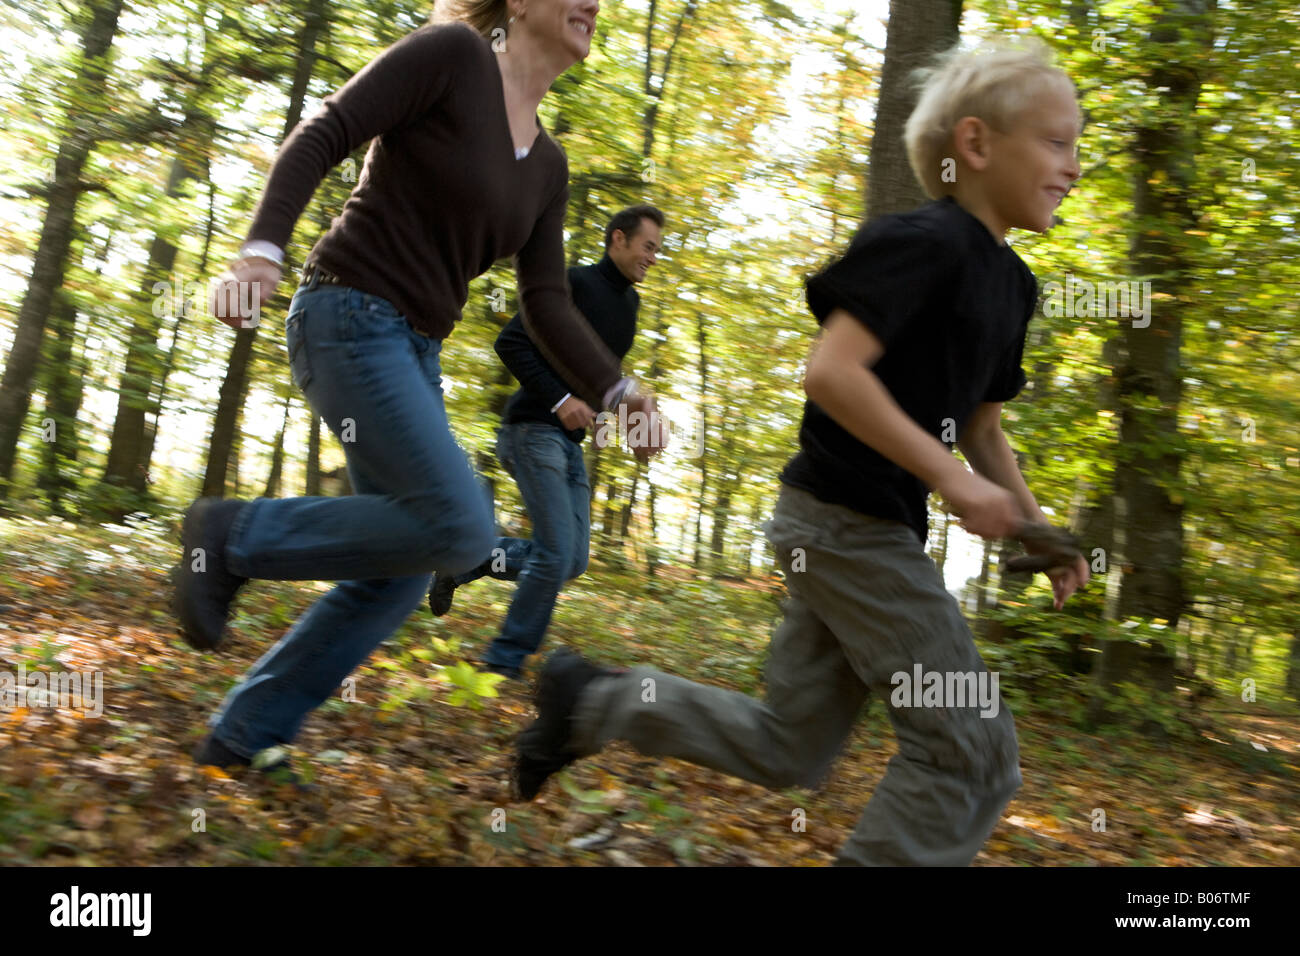 Family, nature and fitness Stock Photo